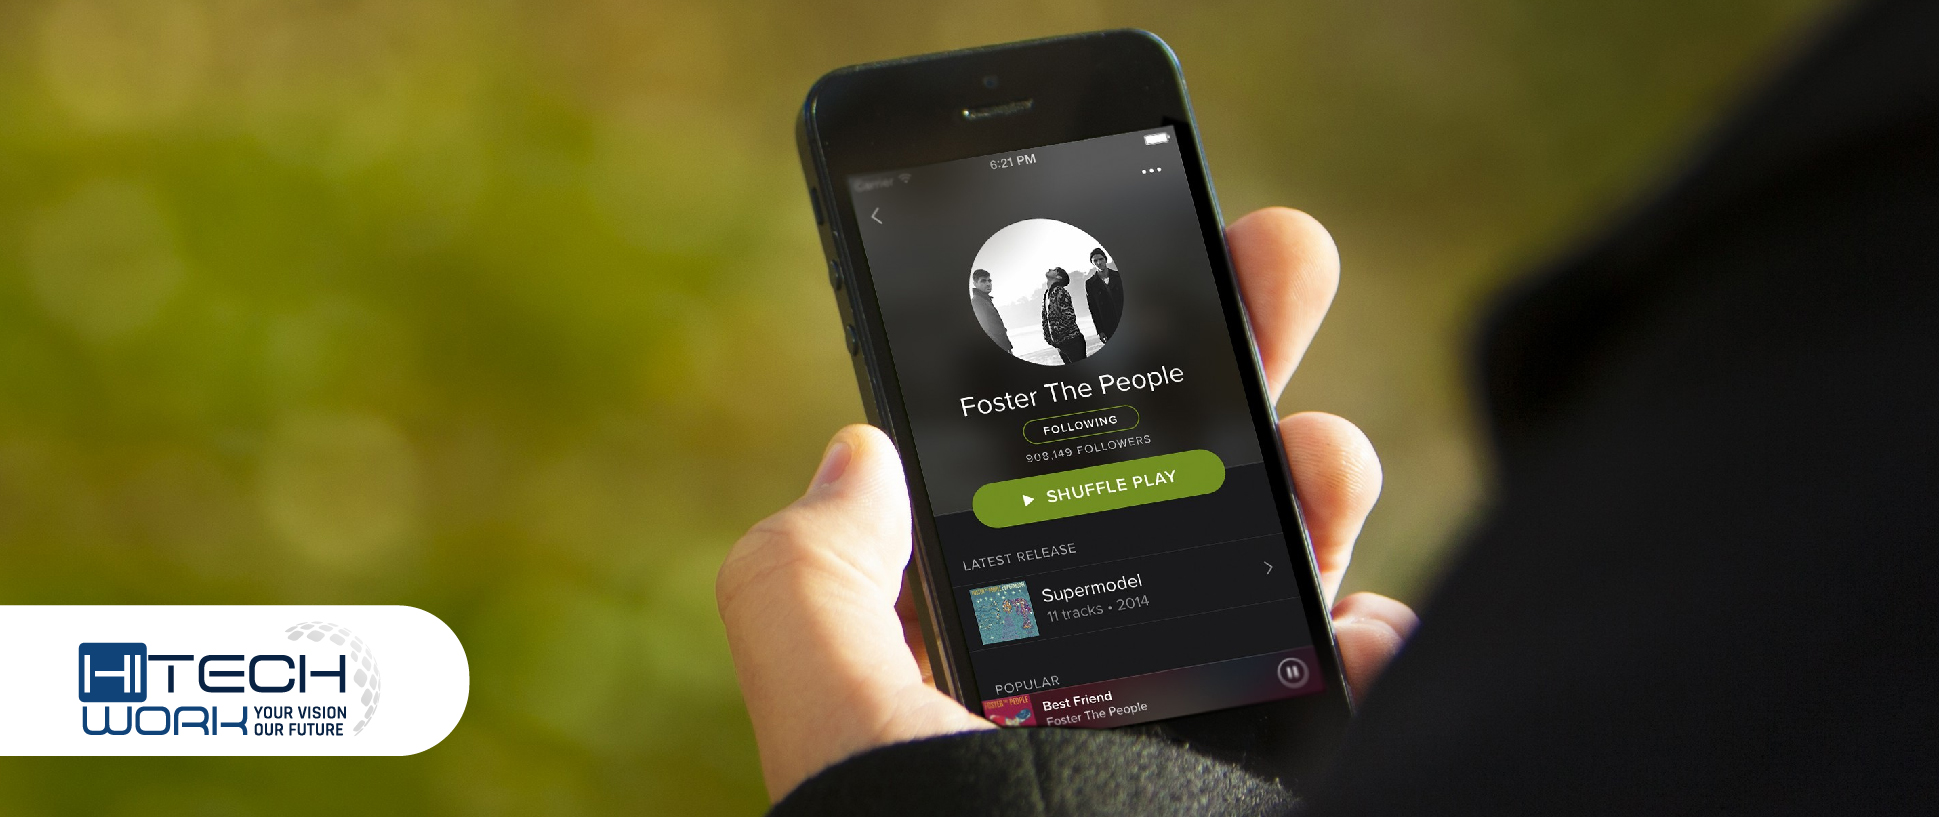 How To See Who Liked Your Playlist on Spotify